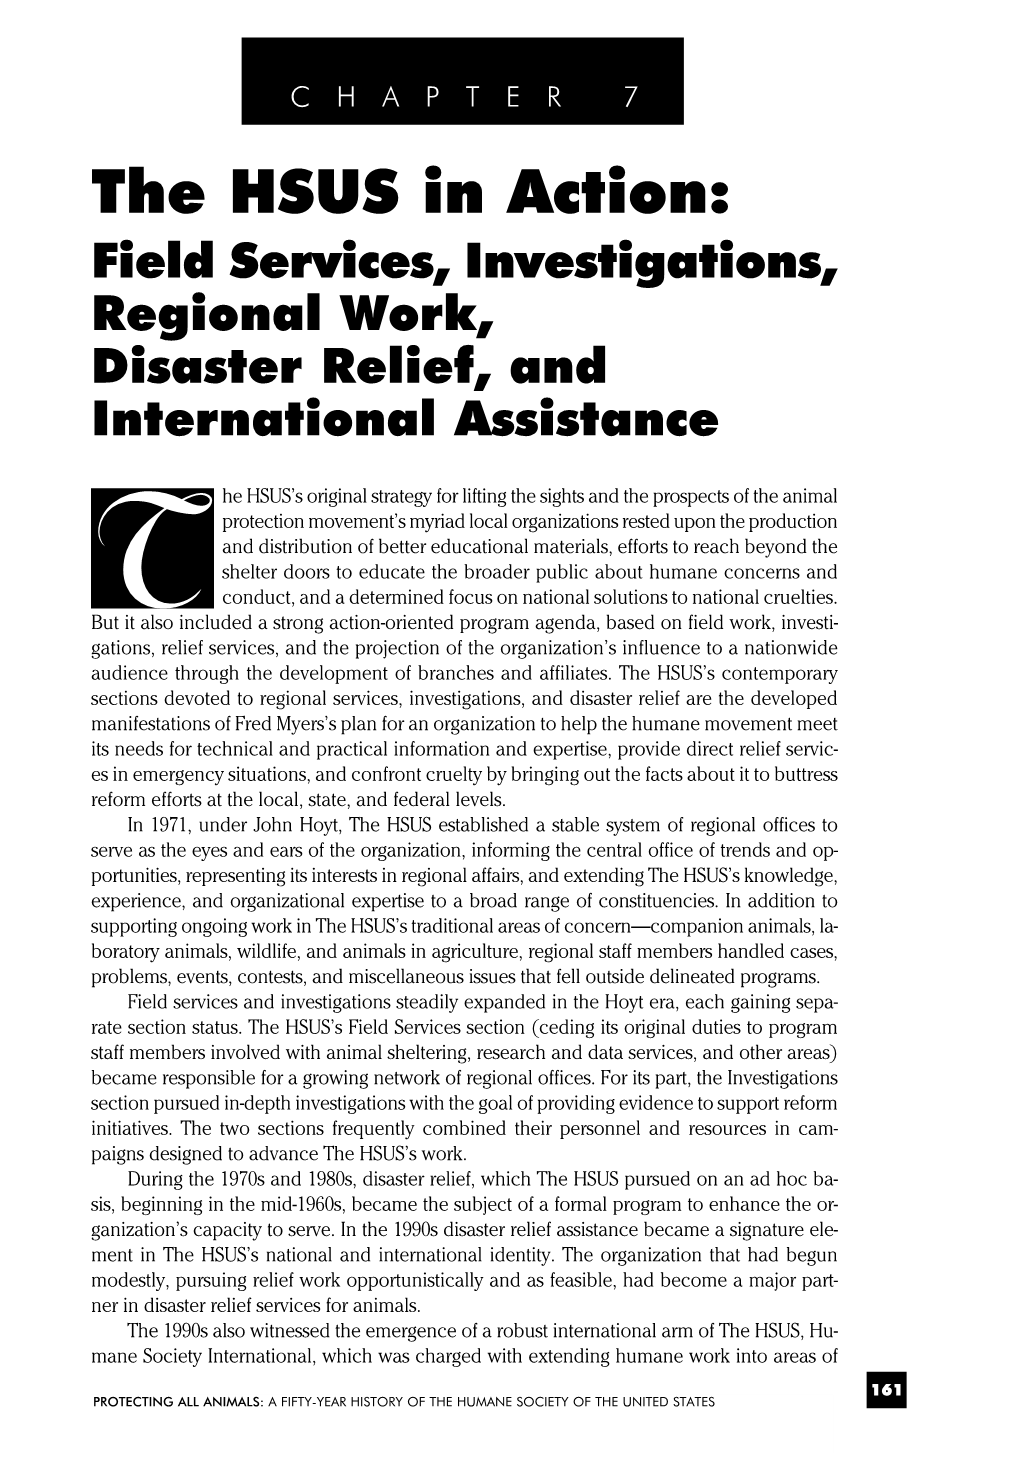 The HSUS in Action: Field Services, Investigations, Regional Work, Disaster Relief, and International Assistance